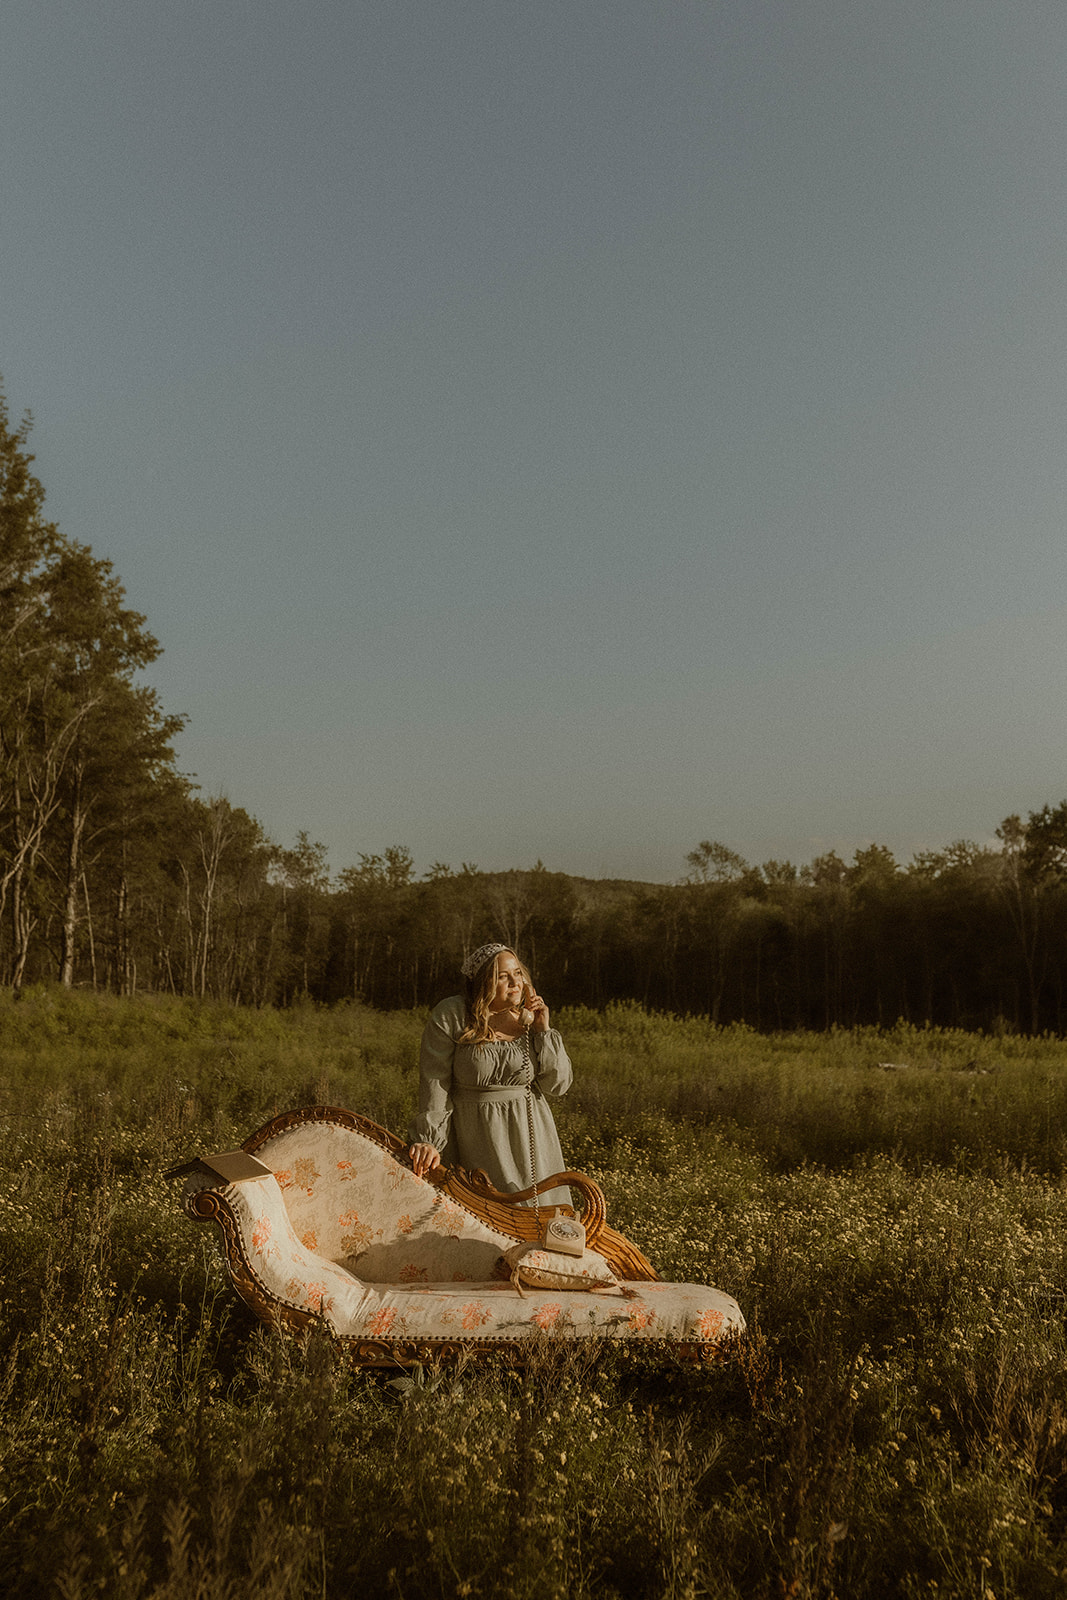 young girl poses with a vintage chaise during her field photoshoot